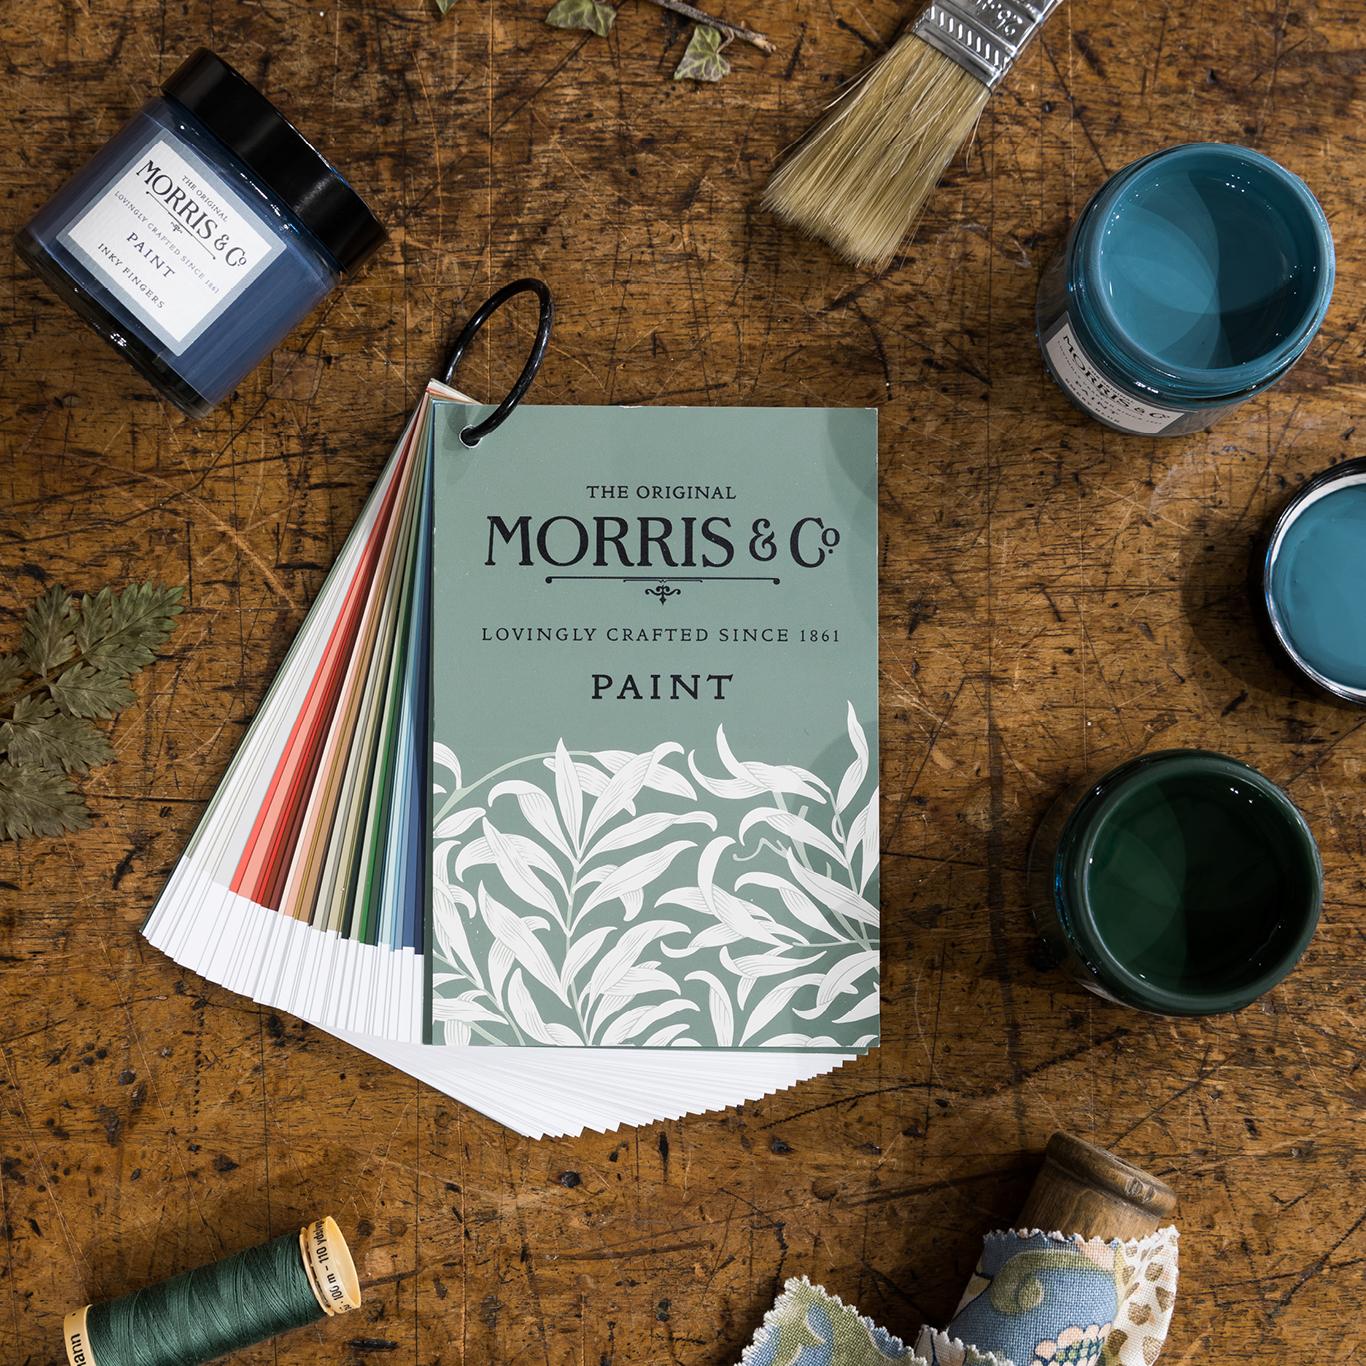 Morris & Co Fan Deck Paint Chart available at No.42 Interiors, Uttoxeter Staffs. No.42 Interiors stocks the full range of sample pots for both Morris & Co. Paint and Zoffany Paint. Order online for free delivery on all paints. Luxury paint at No.42 Interiors , use this fan deck to help make your choice or order a tester pot or two or why not book a colour consultation with with No.42's in house designer.. 